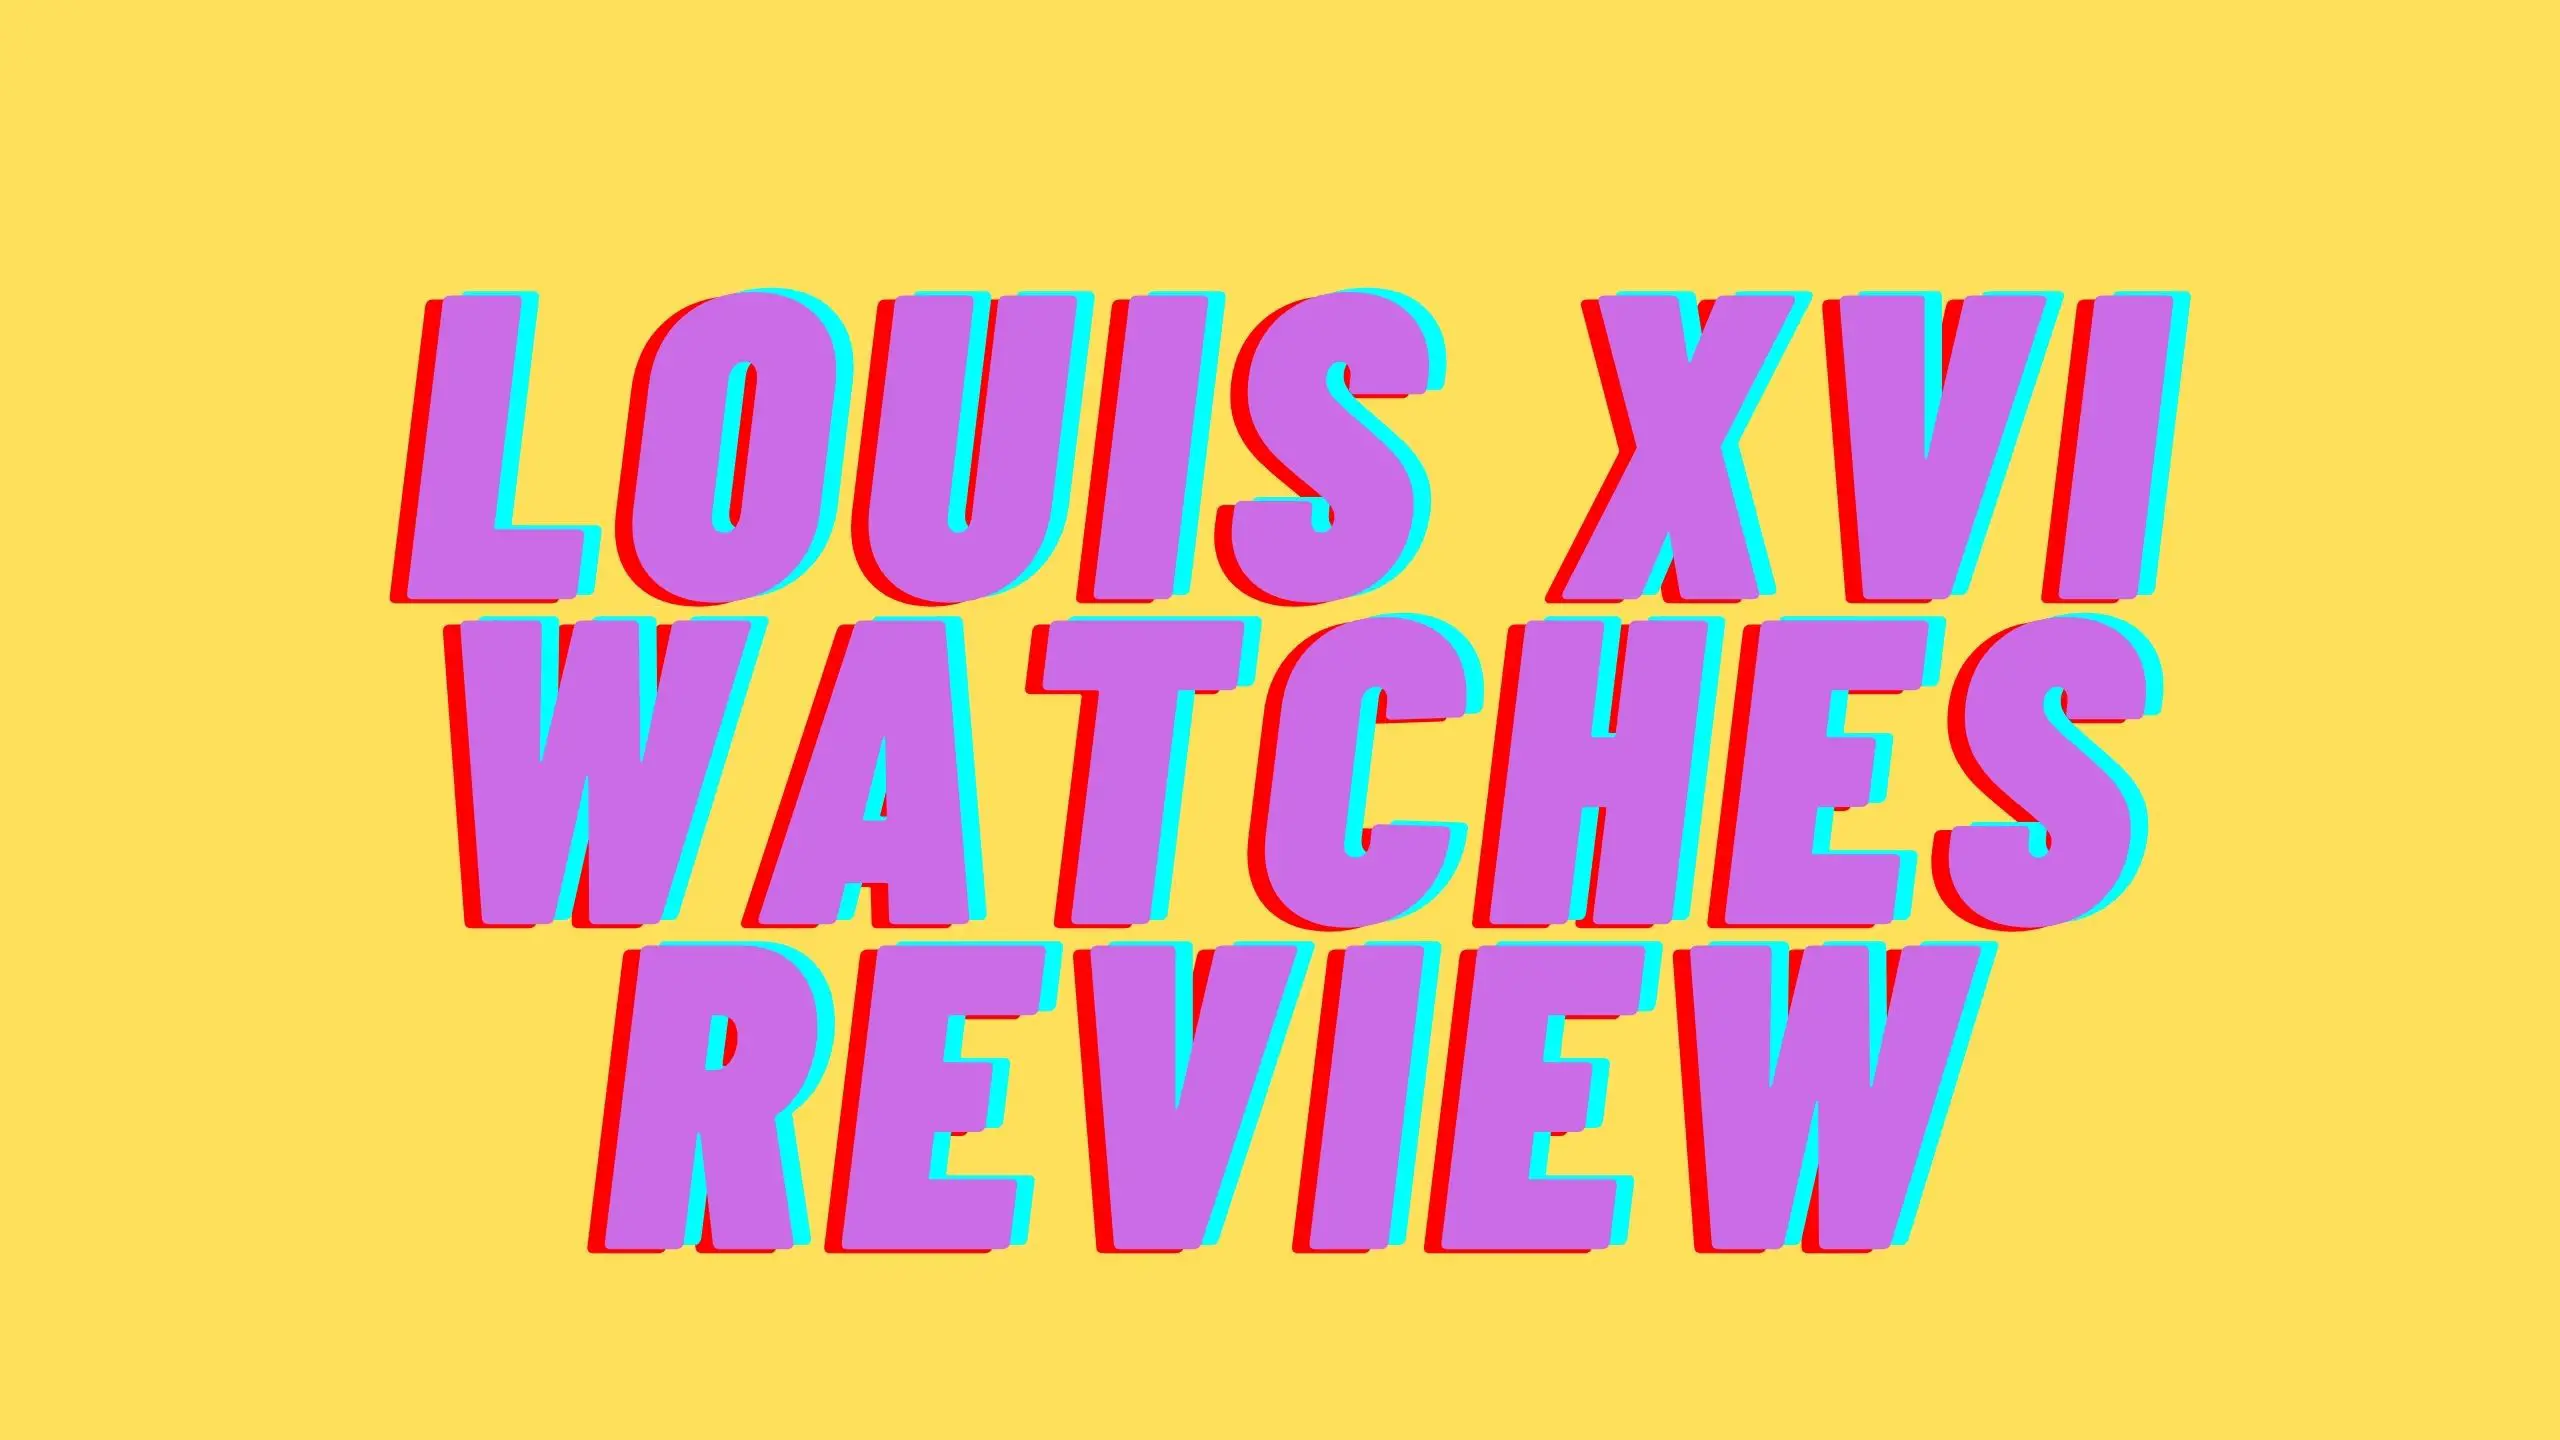 louis xvi watches review